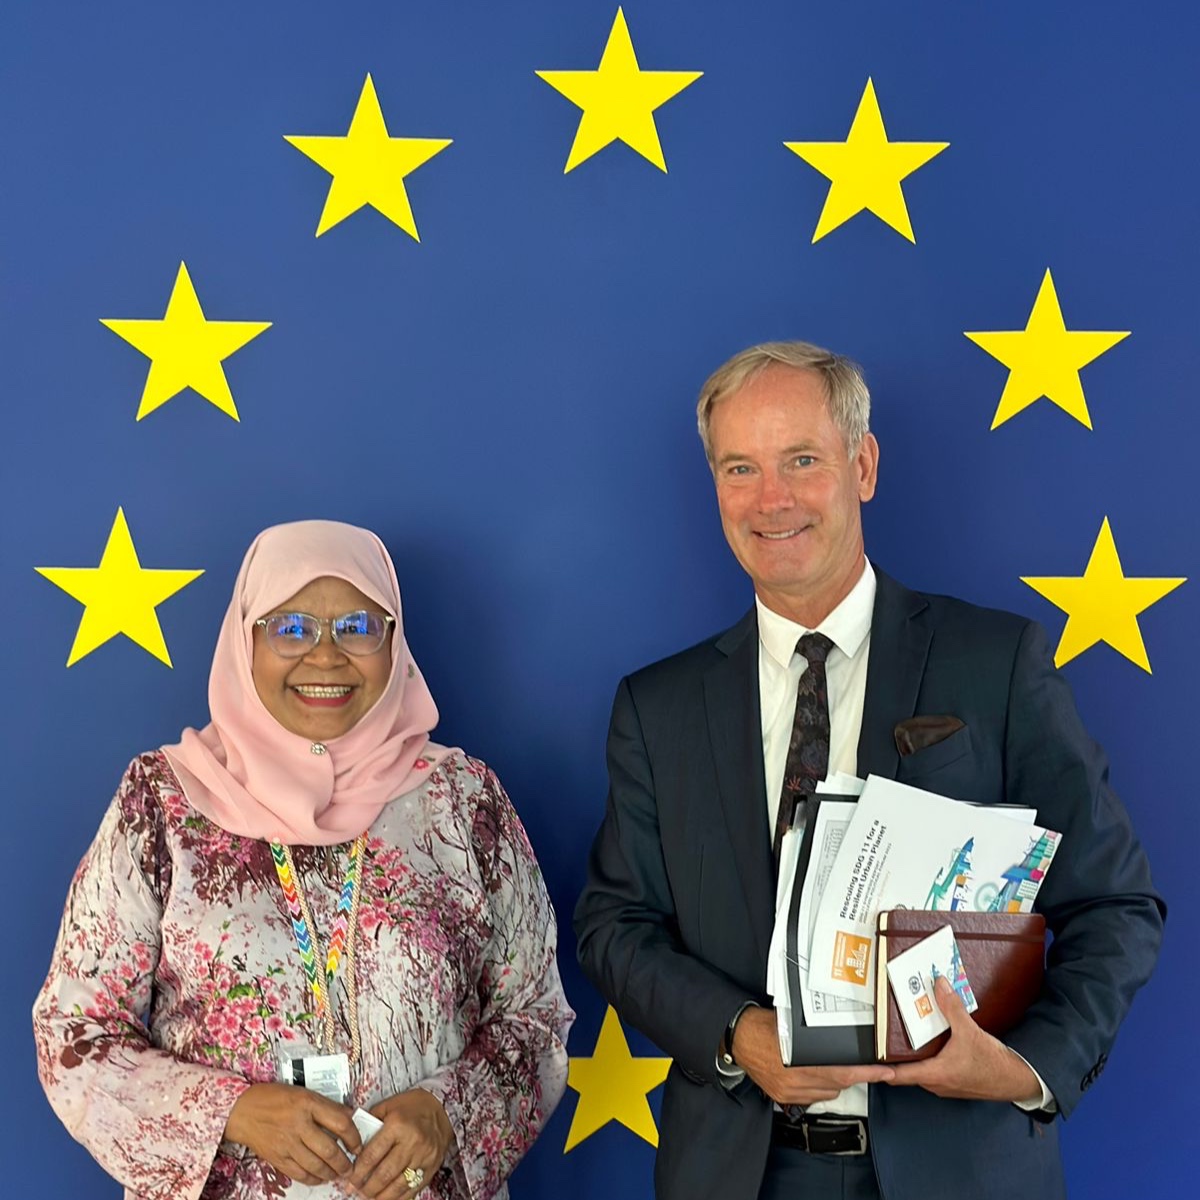 Delighted to meet Amb. @OlofBSkoog, Head of EU 🇪🇺 Delegation to UN 🇺🇳. We welcome UN/EU high-level dialogue to identify ways to join forces to address the most pressing issues, #SDGLocalization. We have 7 years to accelerate progress and meet #SDGs, especially #SDG11